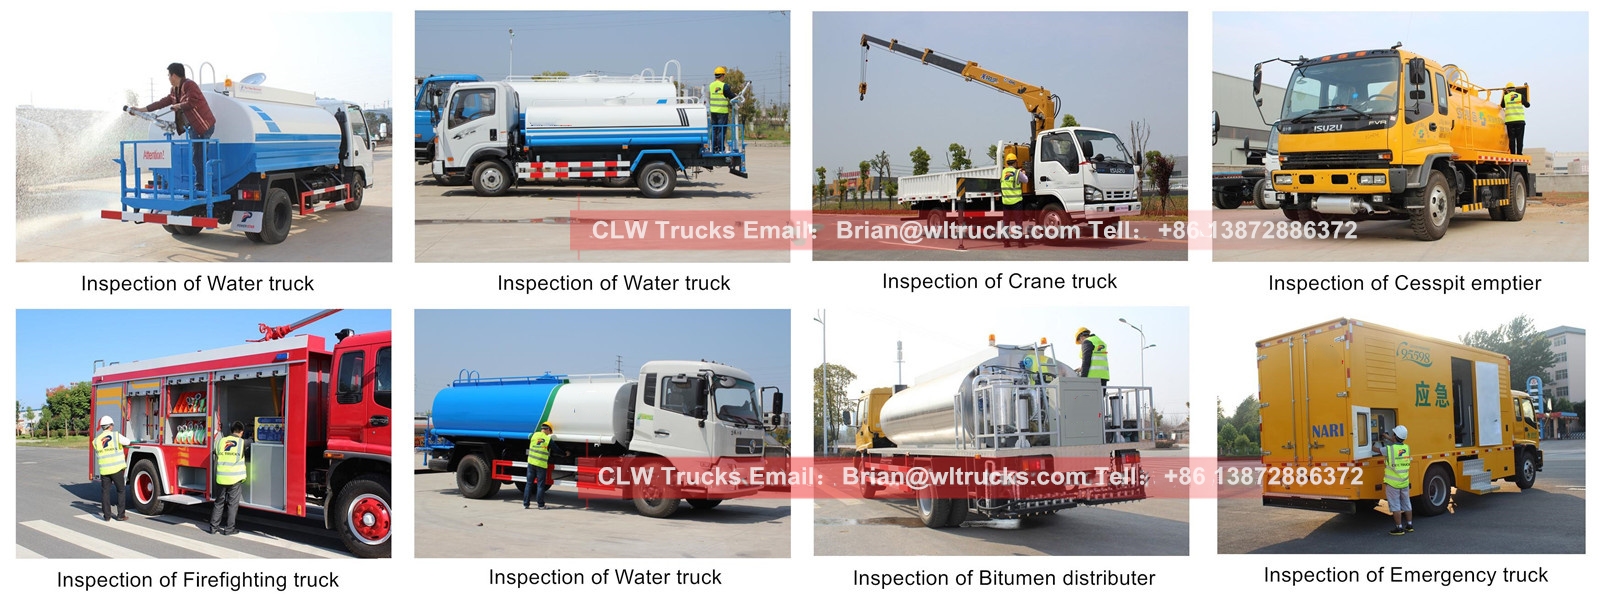 Sewer cleaning truck technical training support